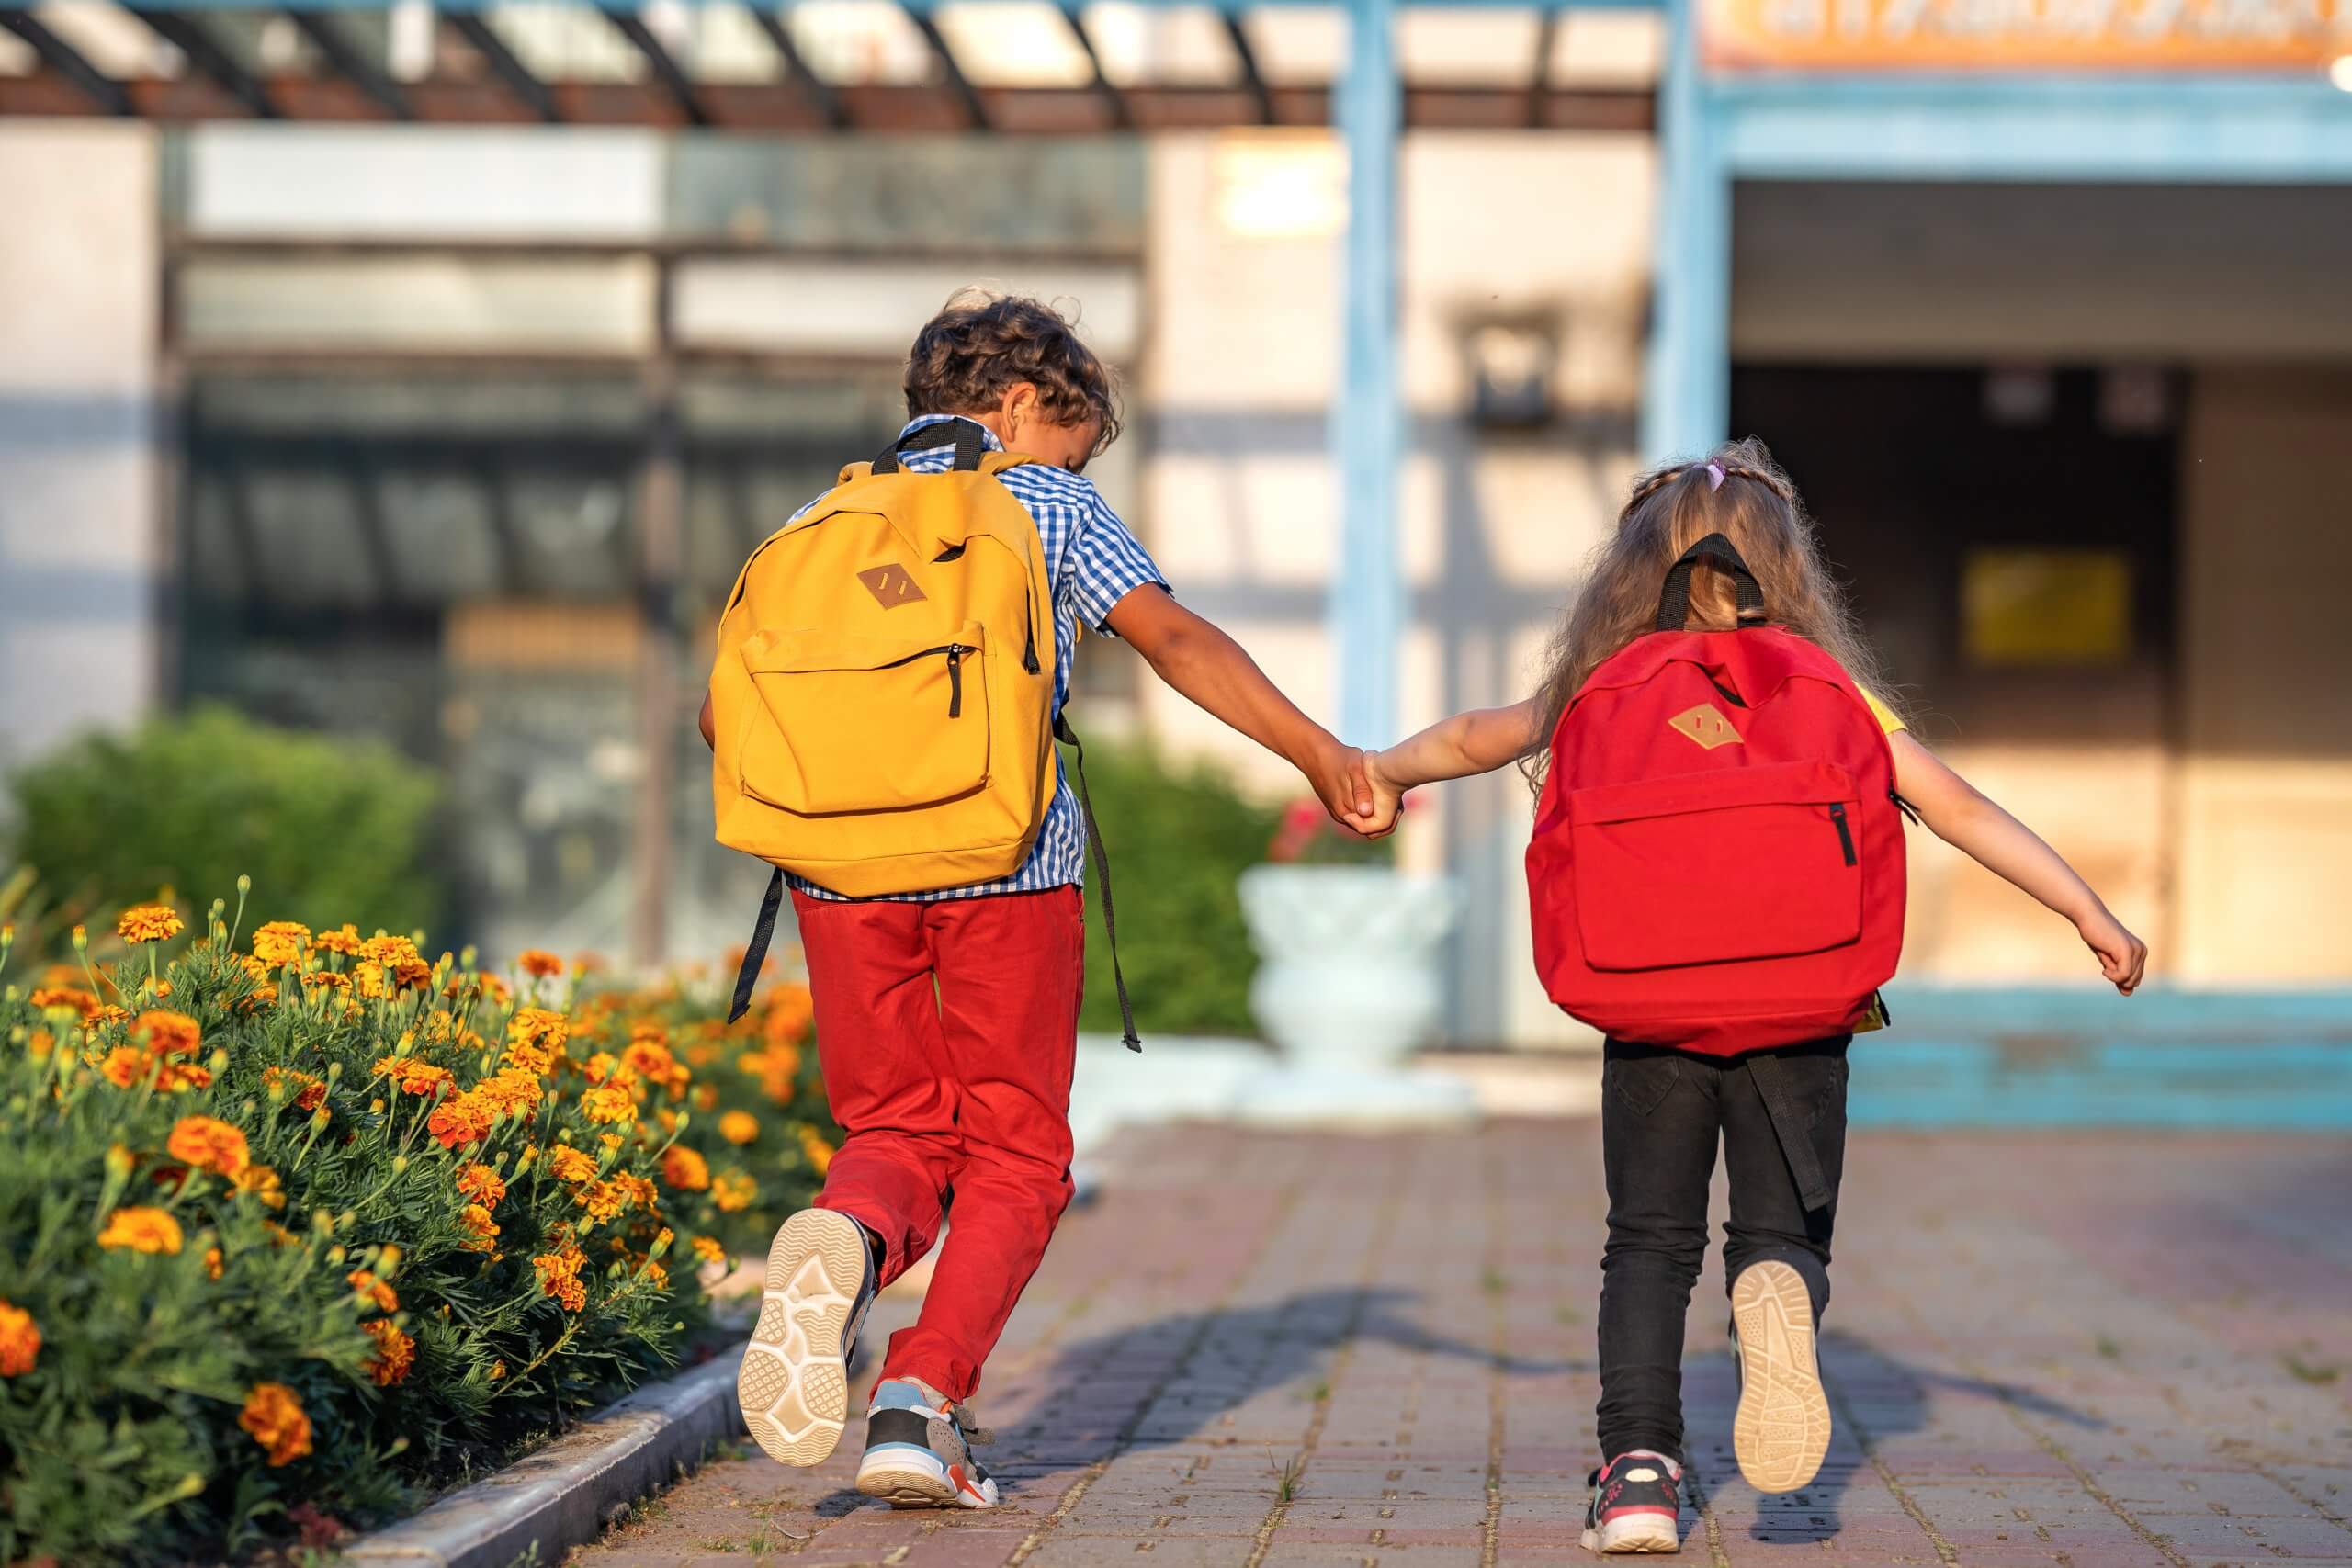 Primary School Pupil. Boy And Girl With Backpacks Walking Down S